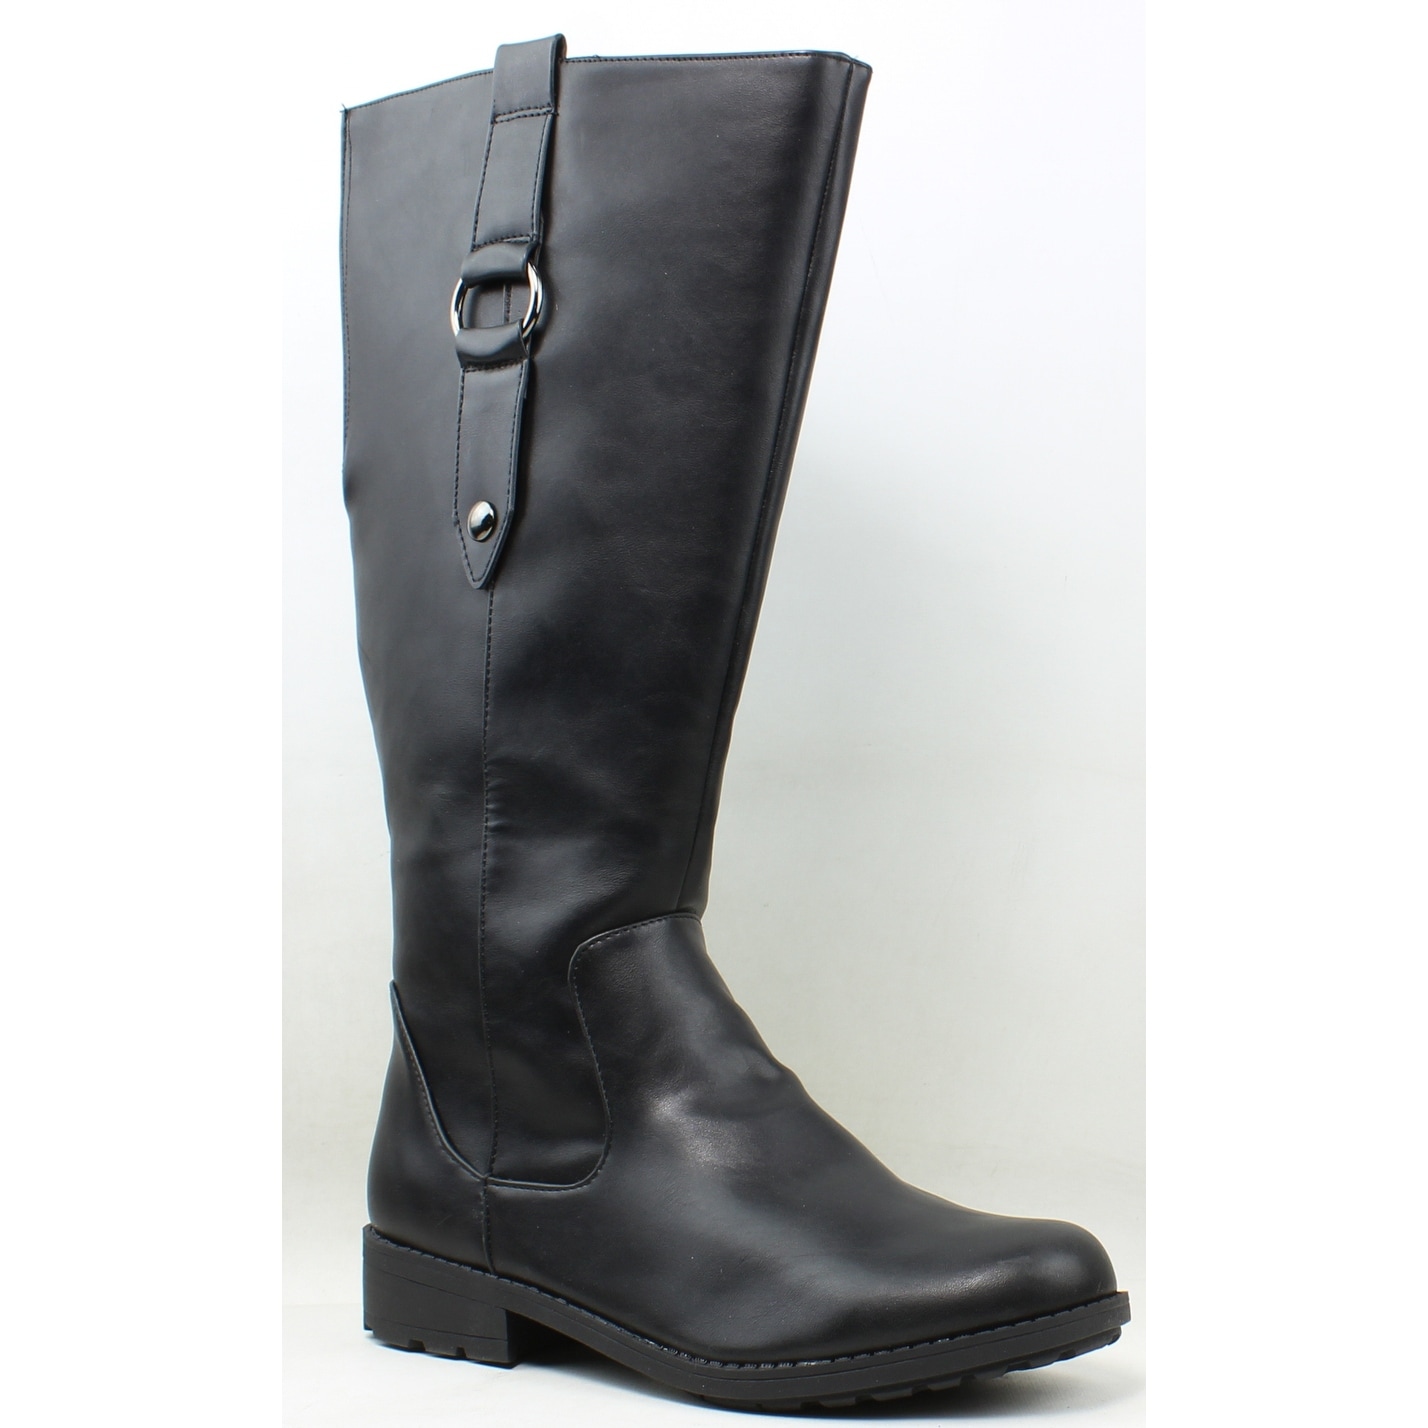 womens black riding boots size 9